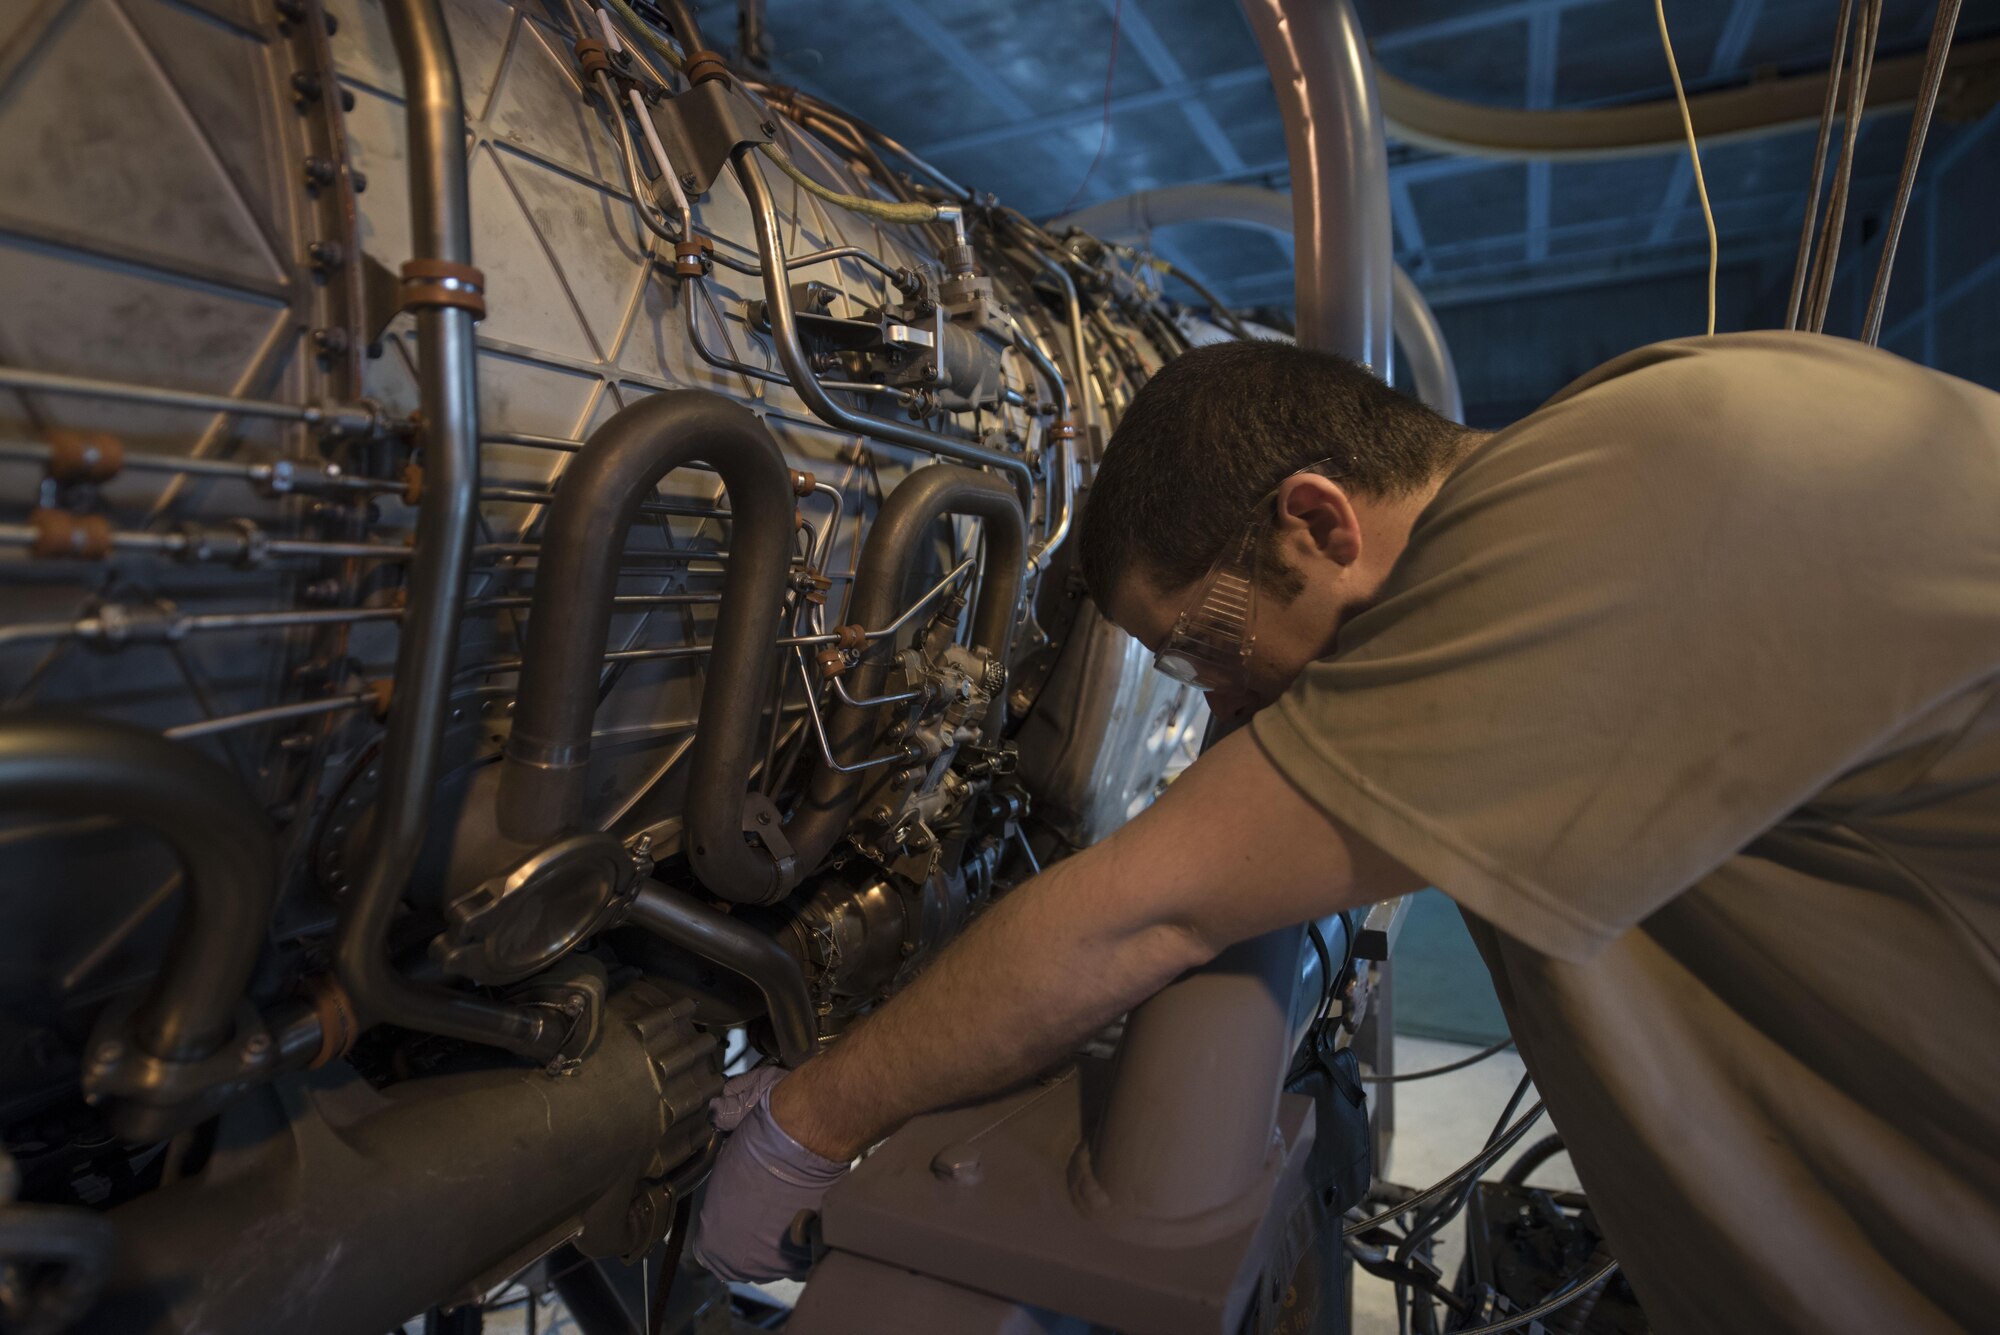 U.S. Air Force Staff Sgt. Donovan Walters, 18th Component Maintenance Squadron aerospace propulsion craftsman, checks a valve on a F100/220 engine March 10, 2017, at Kadena Air Base, Japan. Whenever a new core is installed, the entire unit goes through a “break-in” process. (U.S. Air Force photo by Airman 1st Class Quay Drawdy)